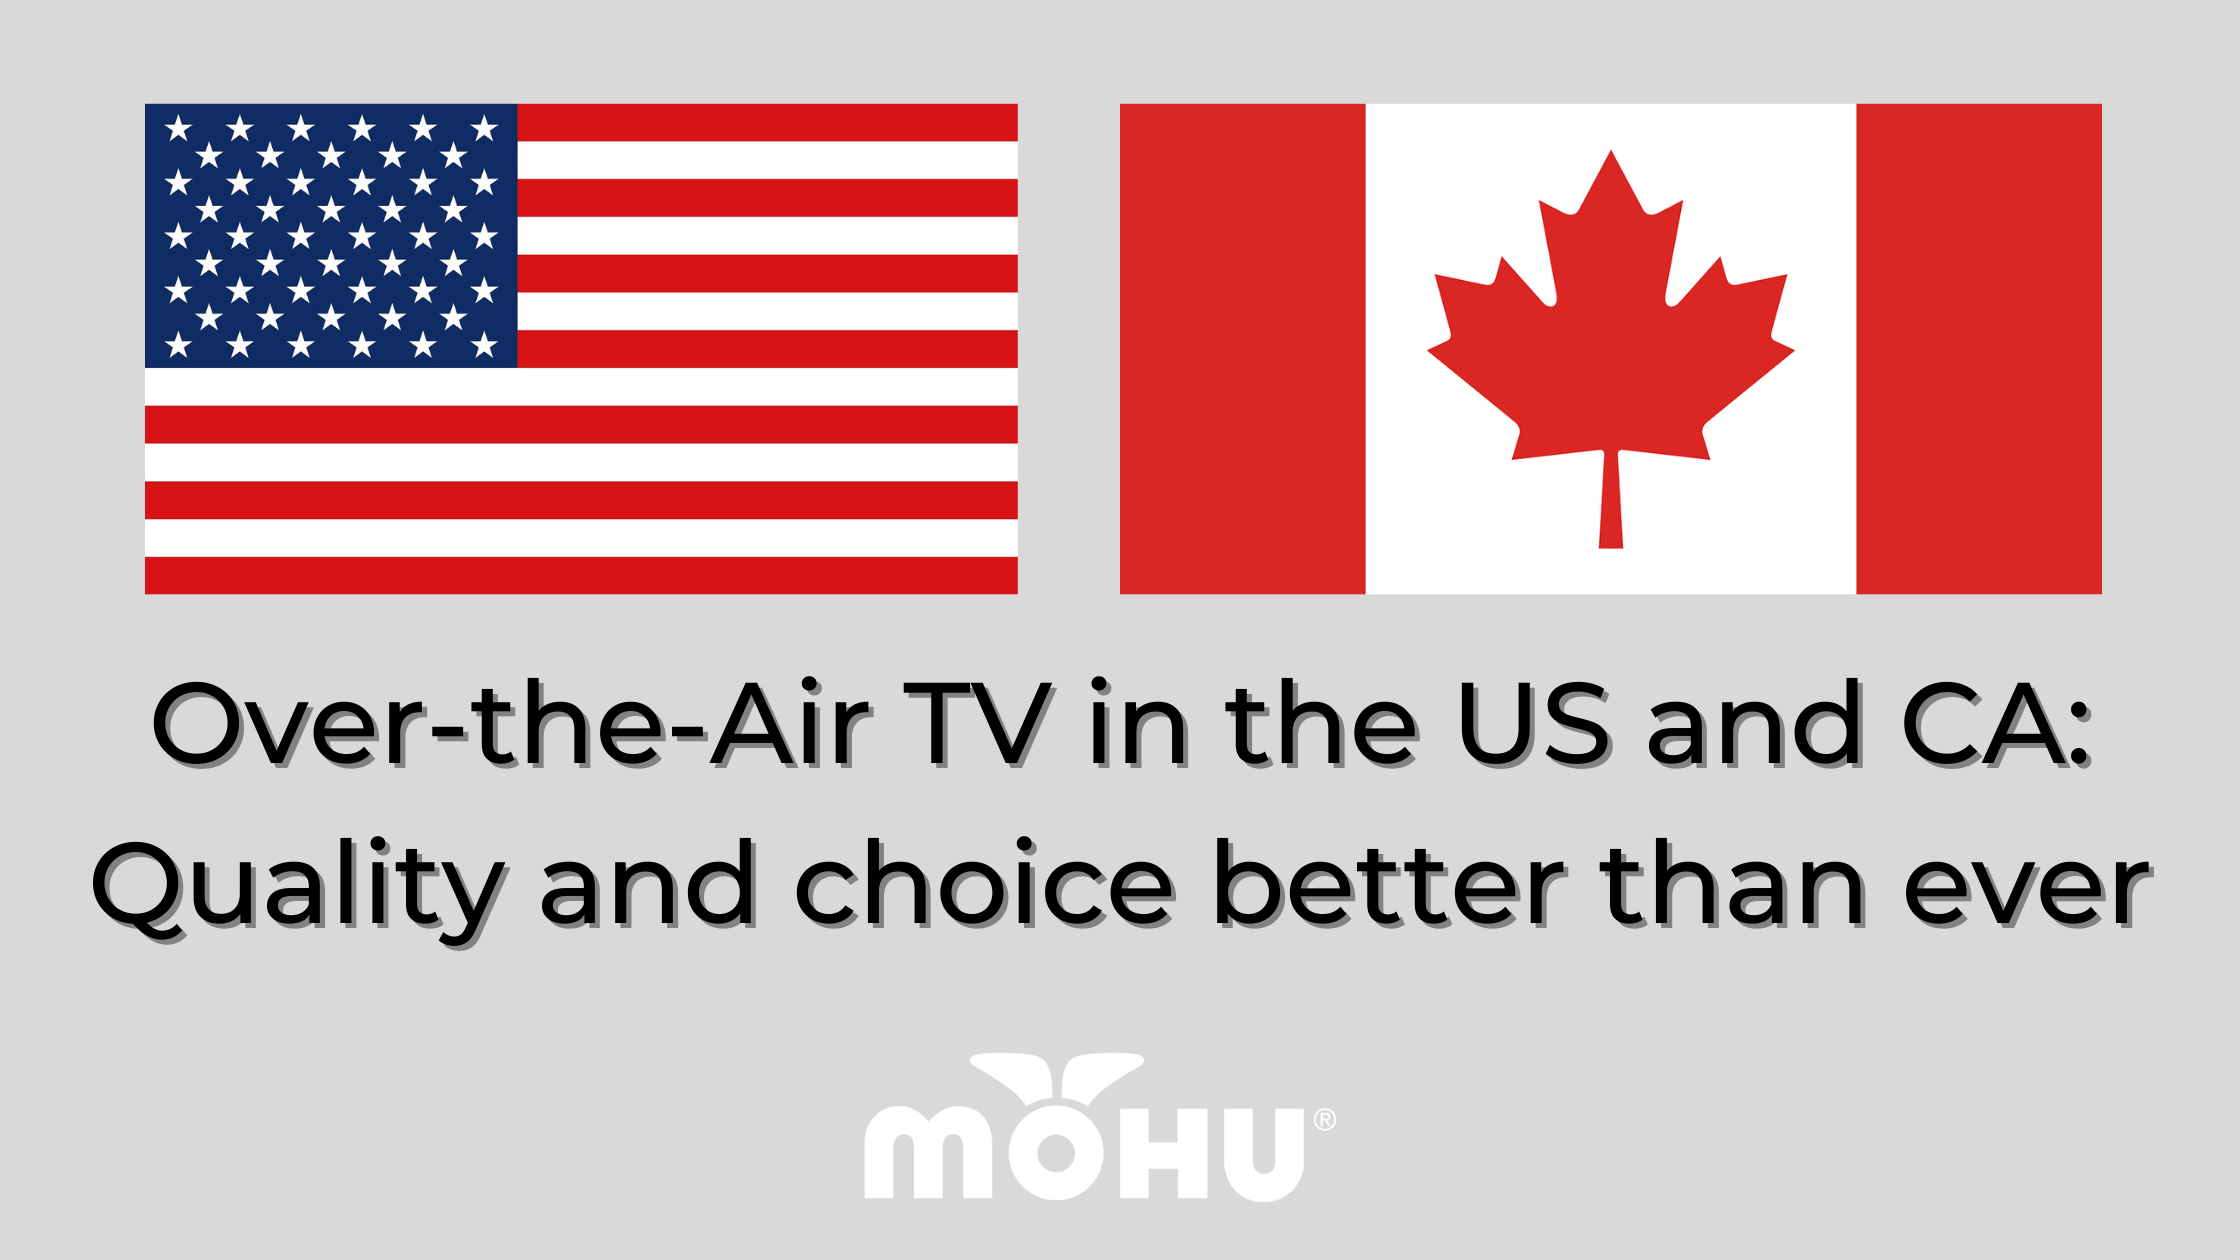 American Flag and Canadian Flag, Over-the-Air TV in the US and CA: Quality and choice better than ever